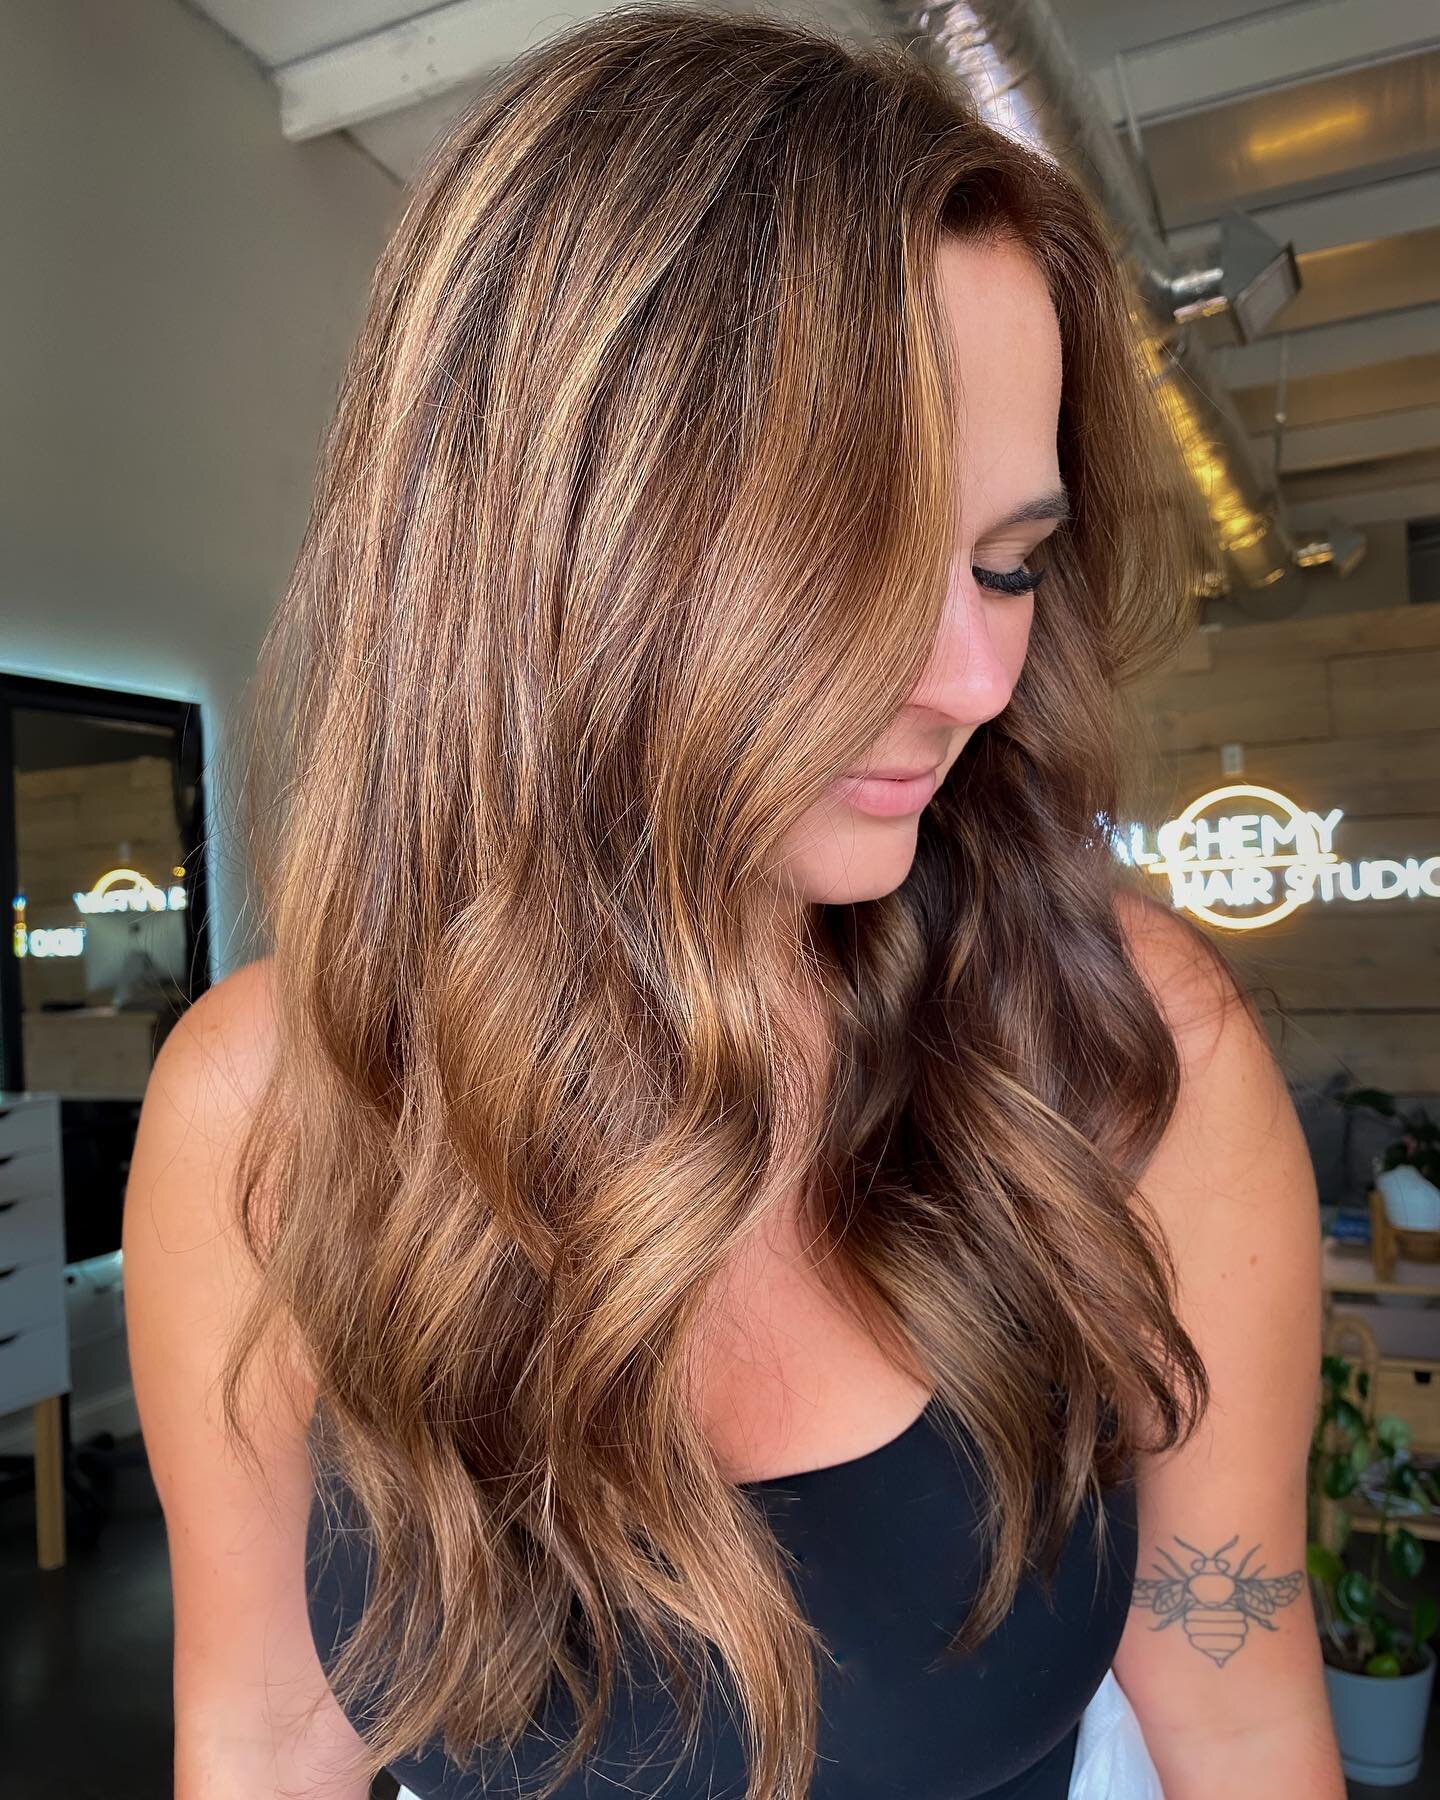 🚨This is not a drill! 🚨
It&rsquo;s officially transition season for your hair!! 
Did you know, it sometimes takes 1-2 visits to get your hair that ✨perfect✨Fall color? 
Whatever your favorite Fall shade is, we&rsquo;ve got you covered 😘
We&rsquo;r